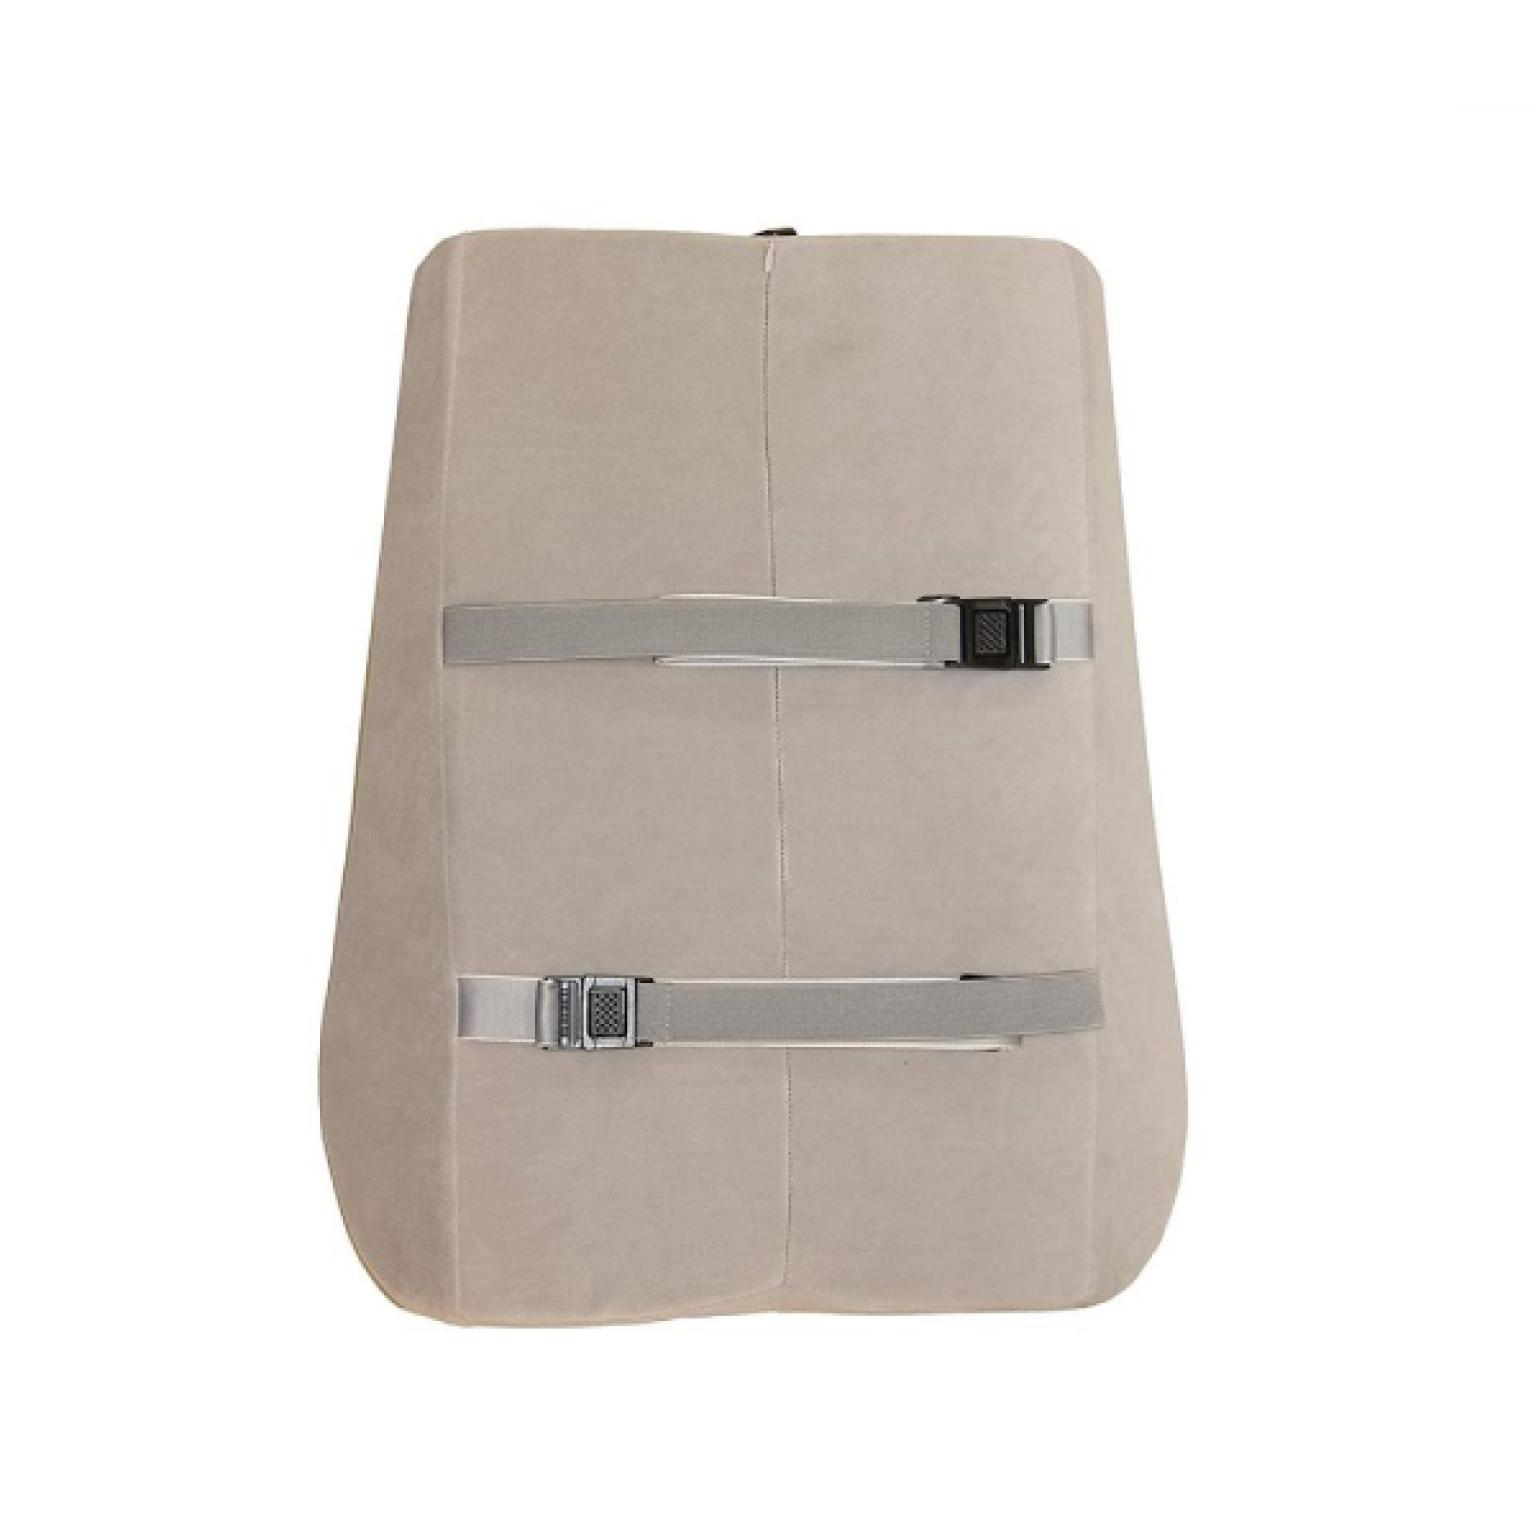 Tynor Back Rest I-46 Back Support Chair Cushion Price in Bangladesh